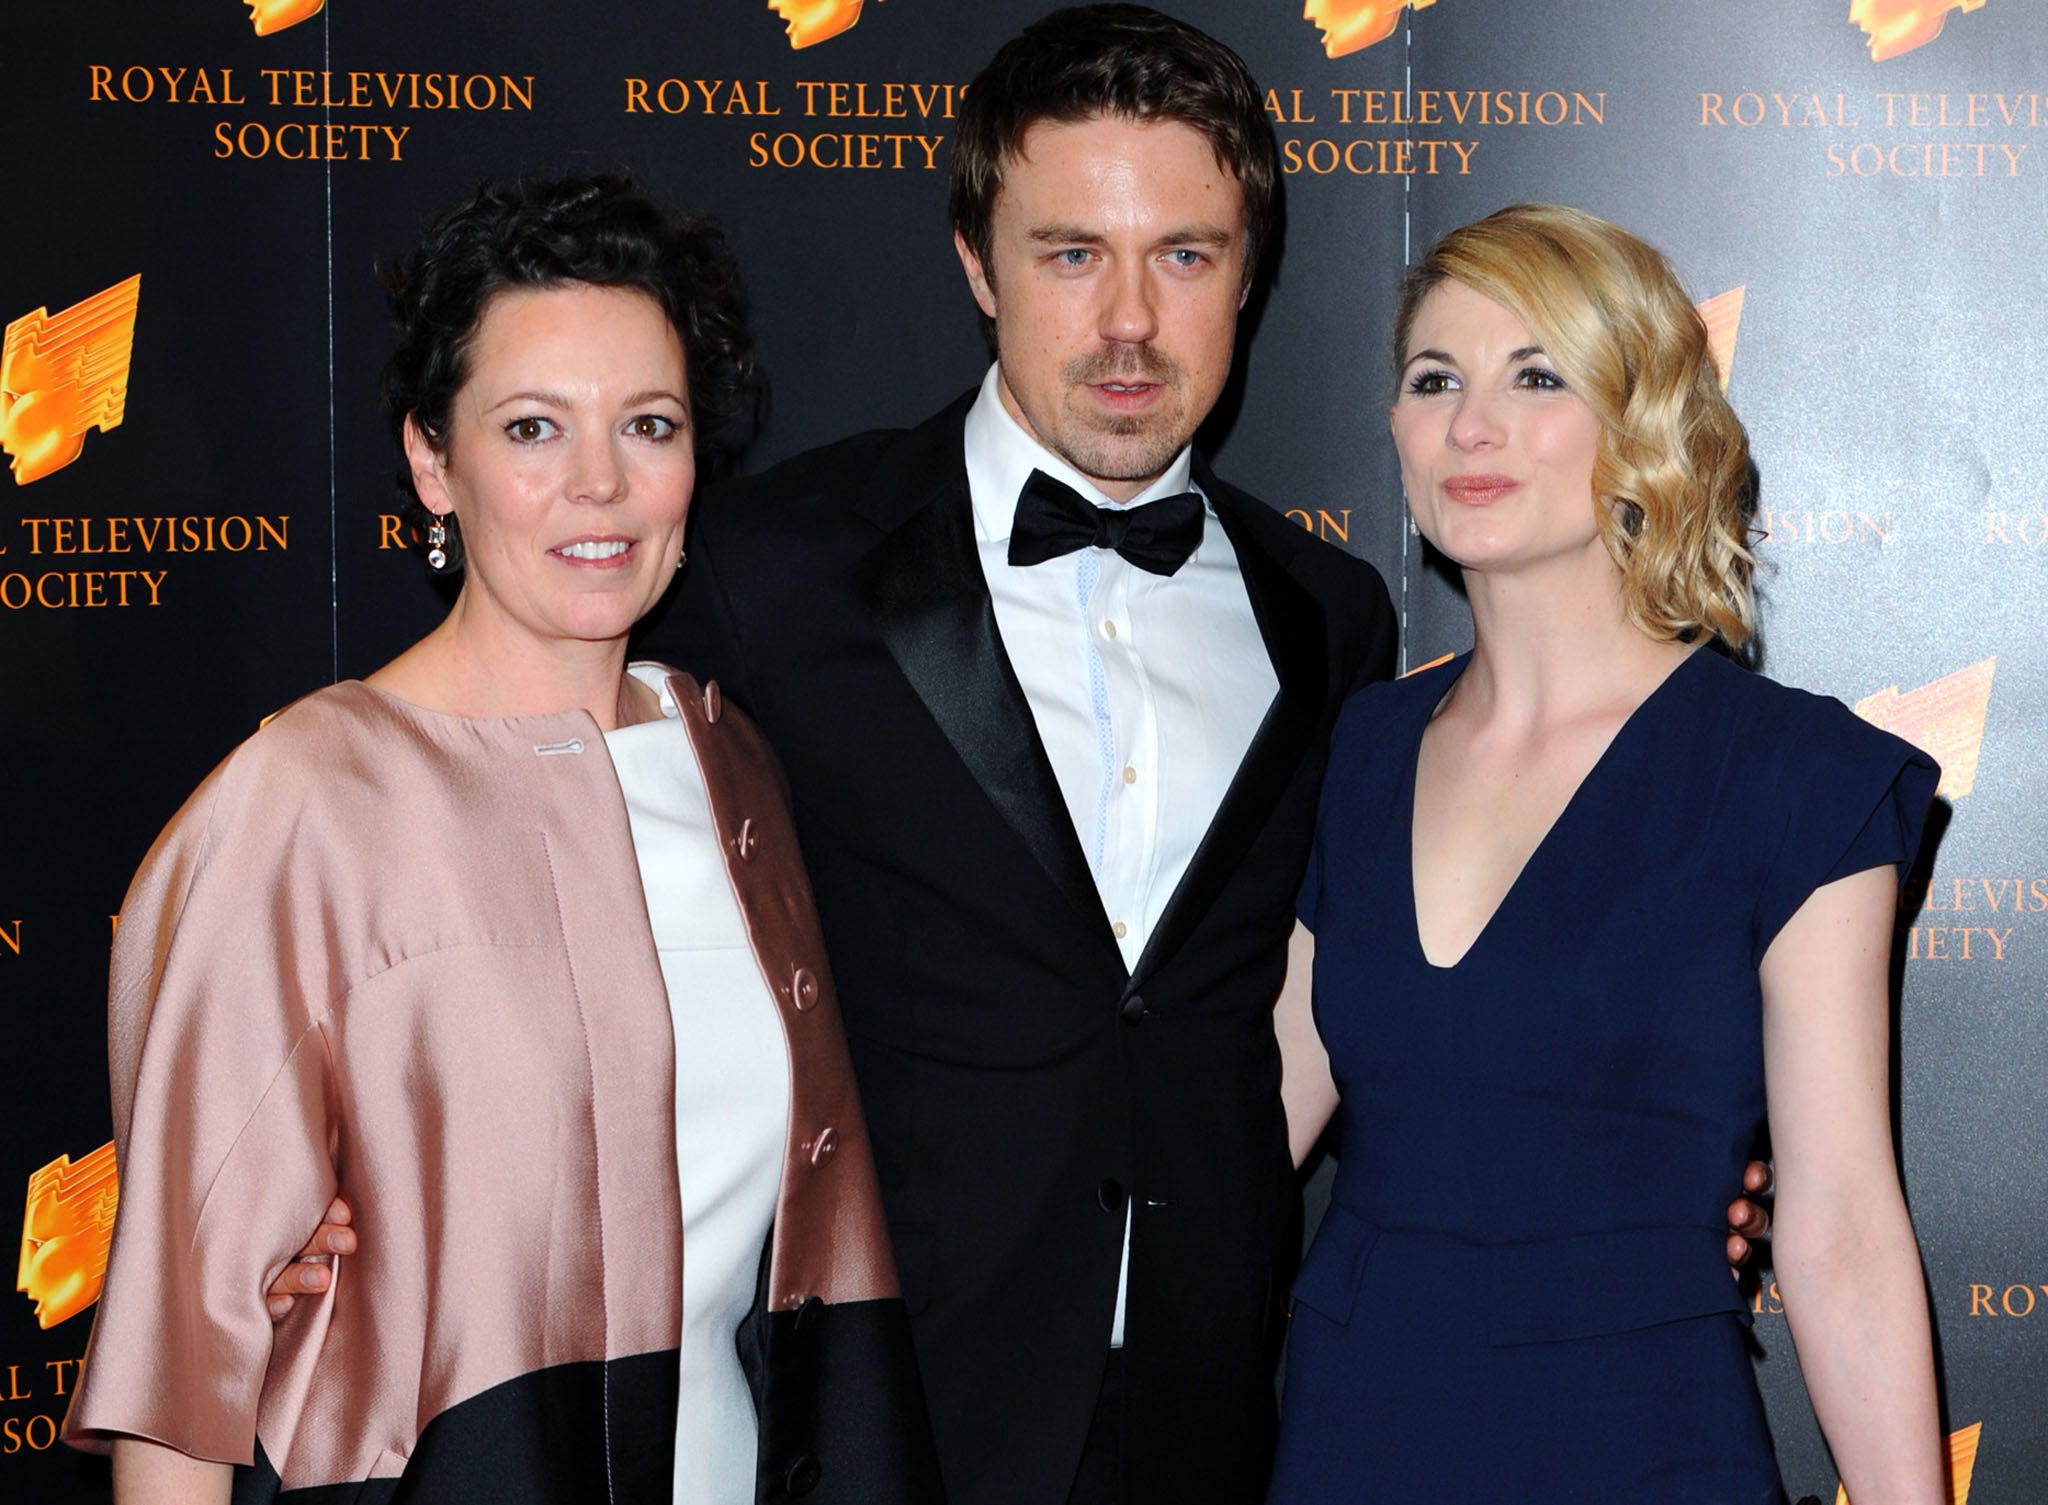 Broadchurch stars Olivia Colman, Andrew Buchan and Jodie Whittaker at the RTS Awards in London